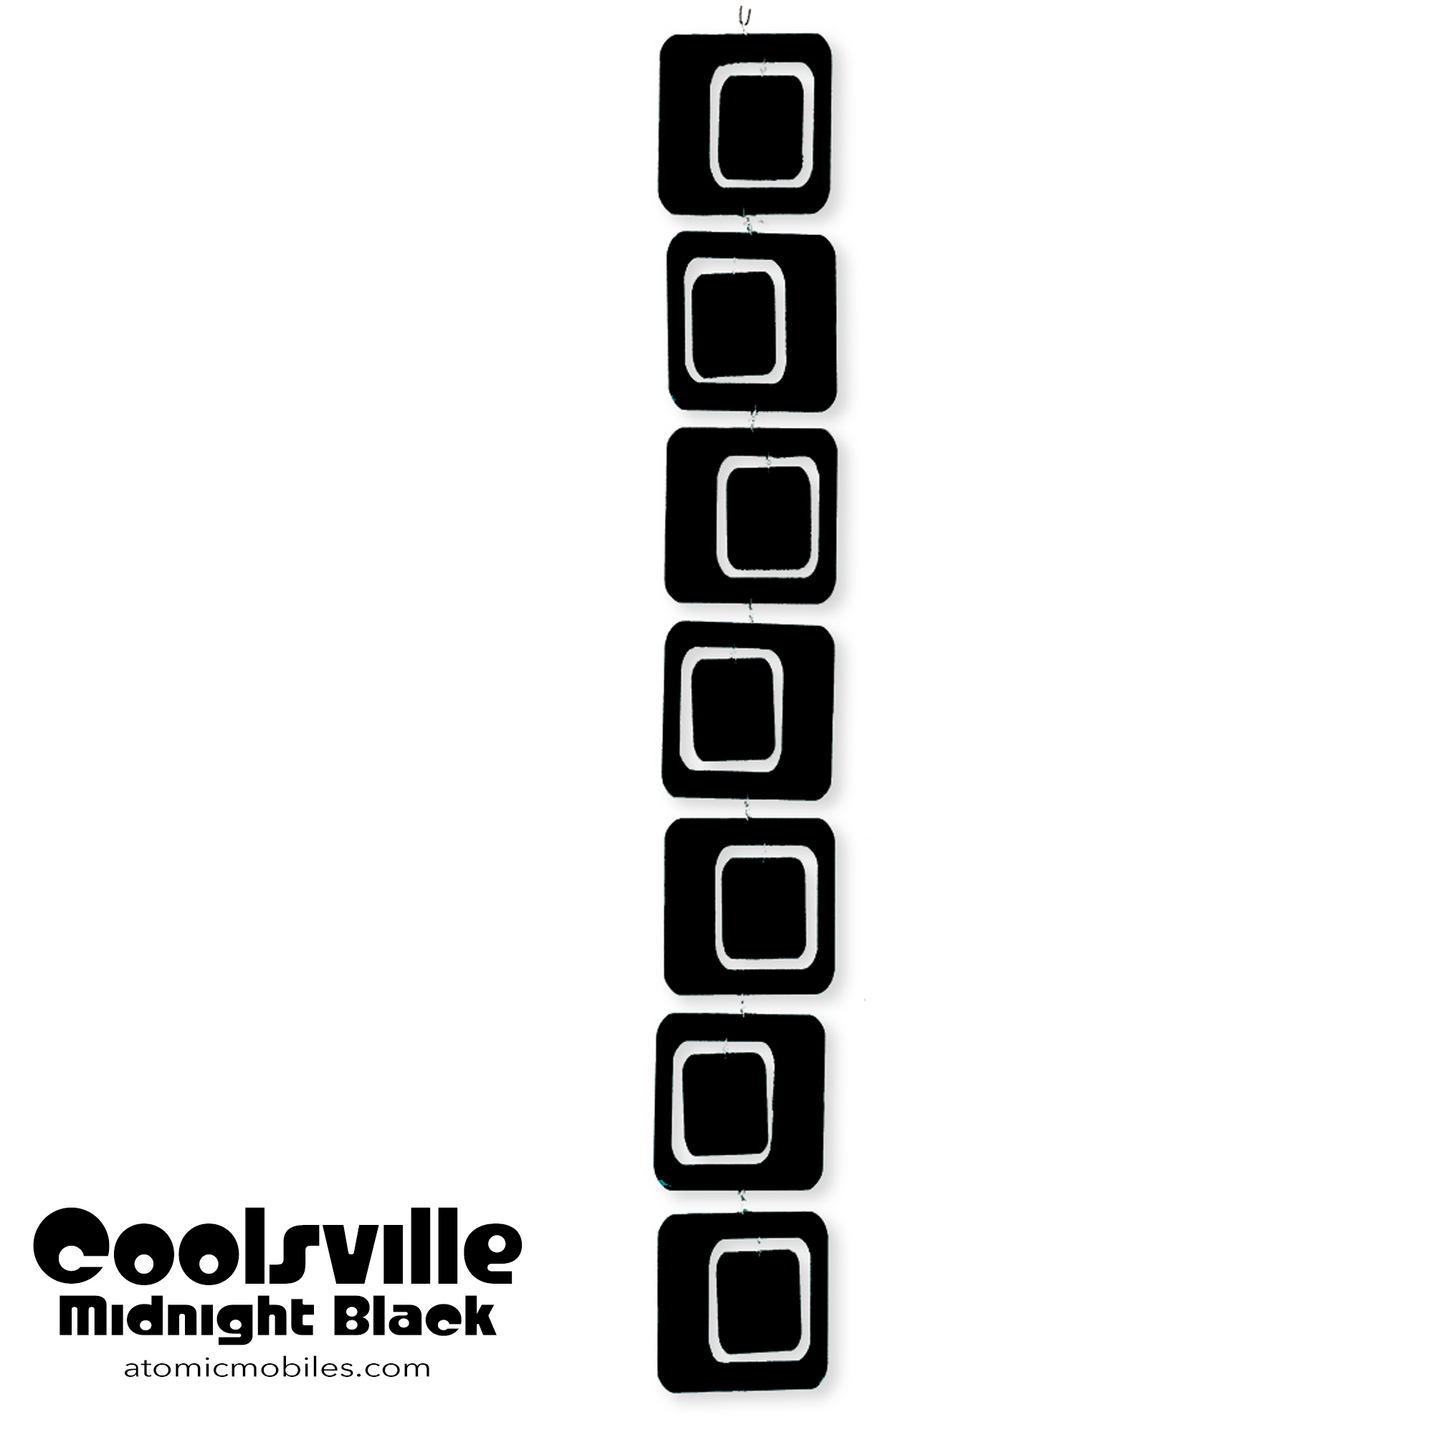 Coolsville kinetic vertical hanging art mobile in Modern Art in Black by AtomicMobiles.com